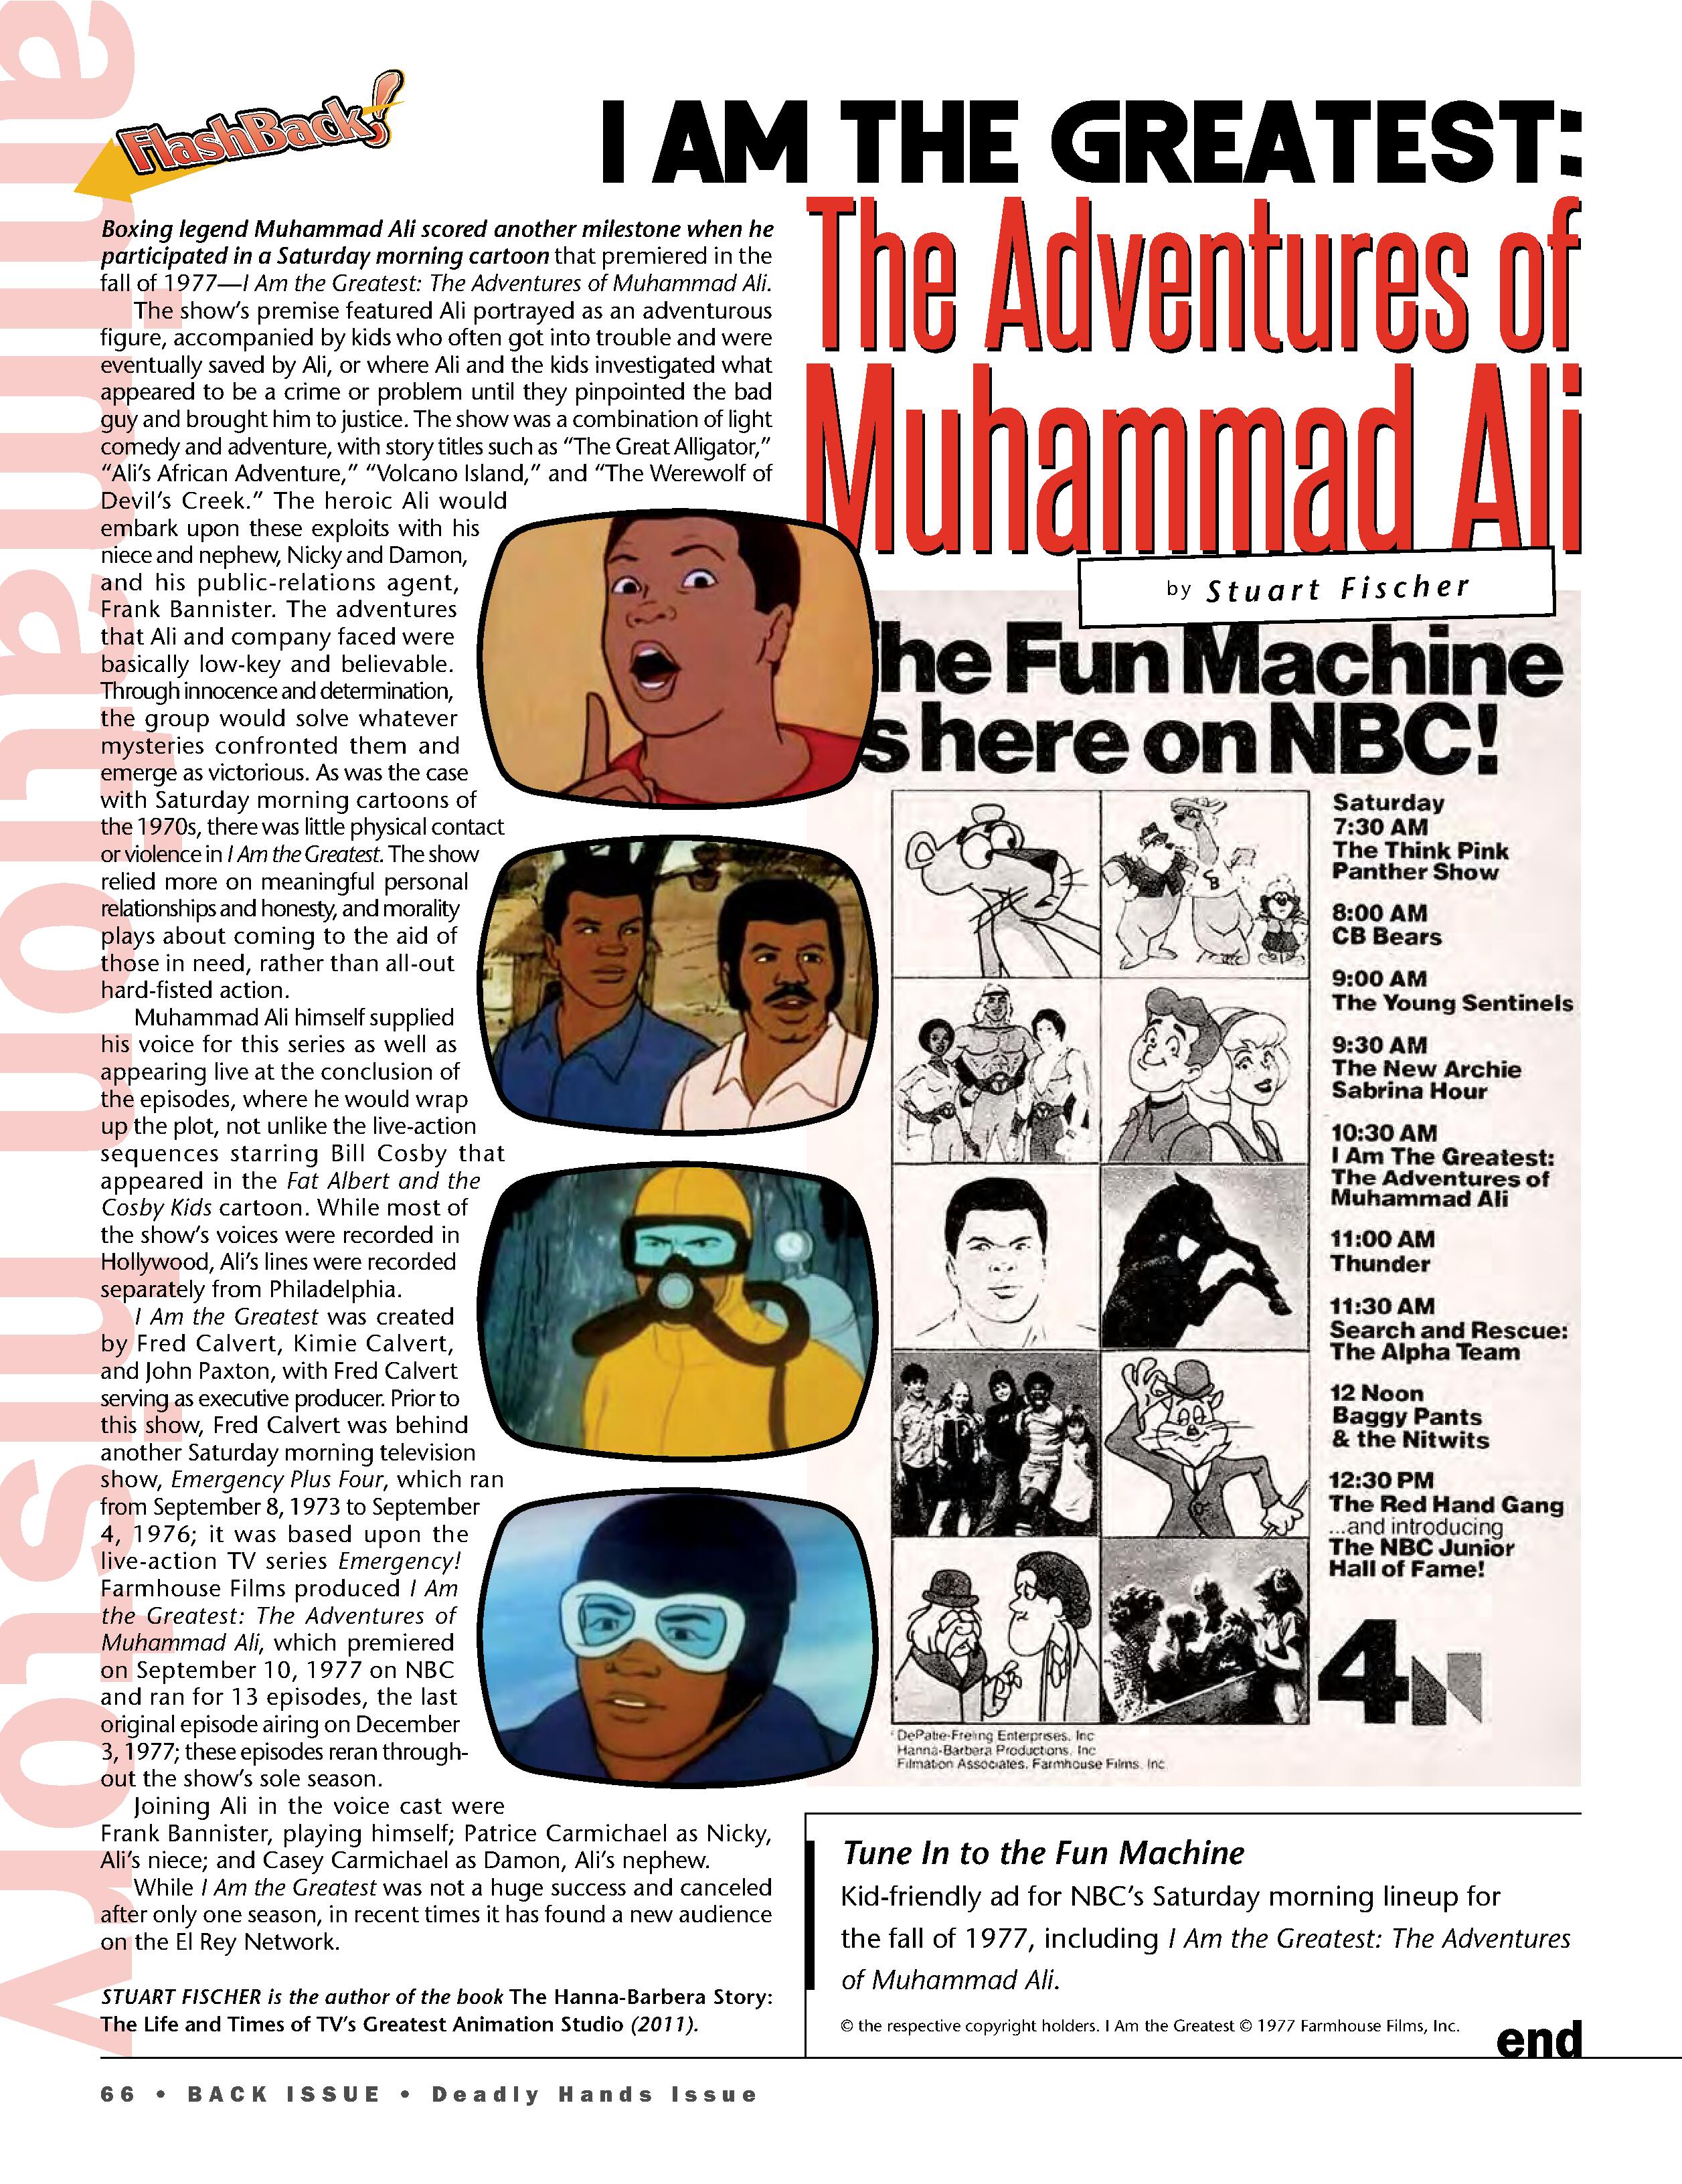 Read online Back Issue comic -  Issue #105 - 68